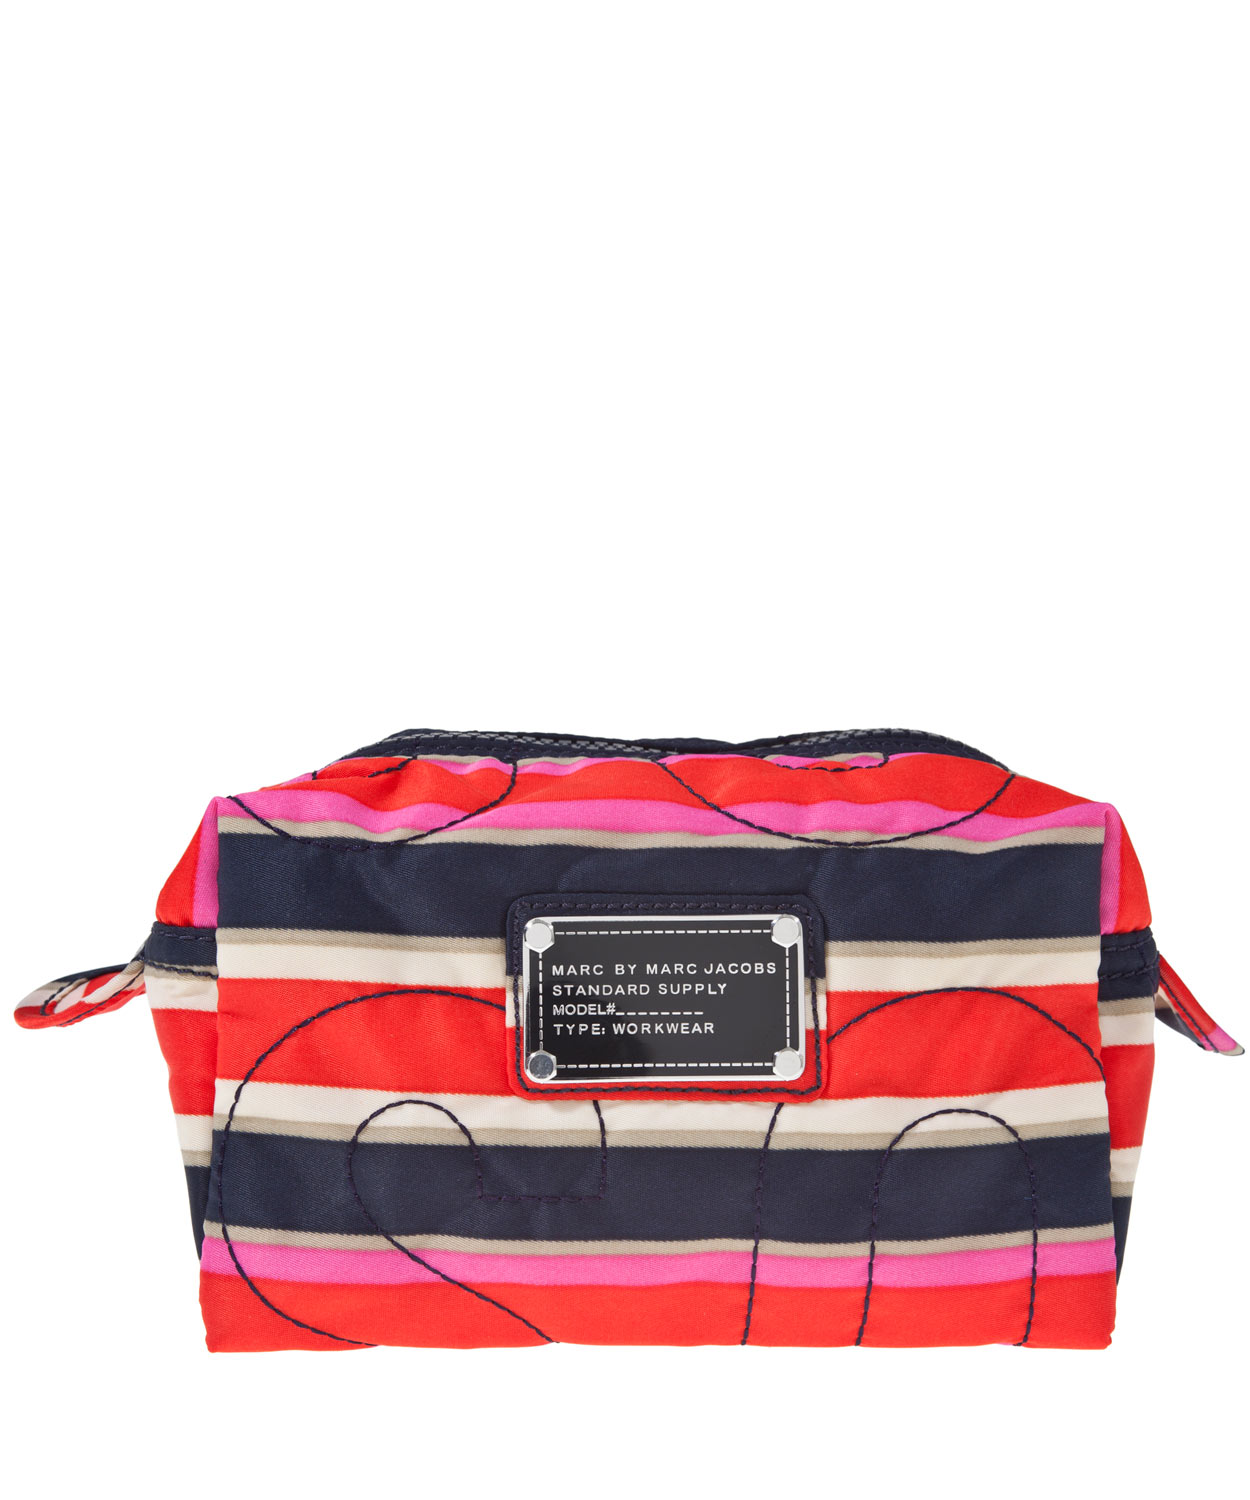 Lyst - Marc by marc jacobs Small Pretty Striped Nylon Cosmetics Bag in Blue